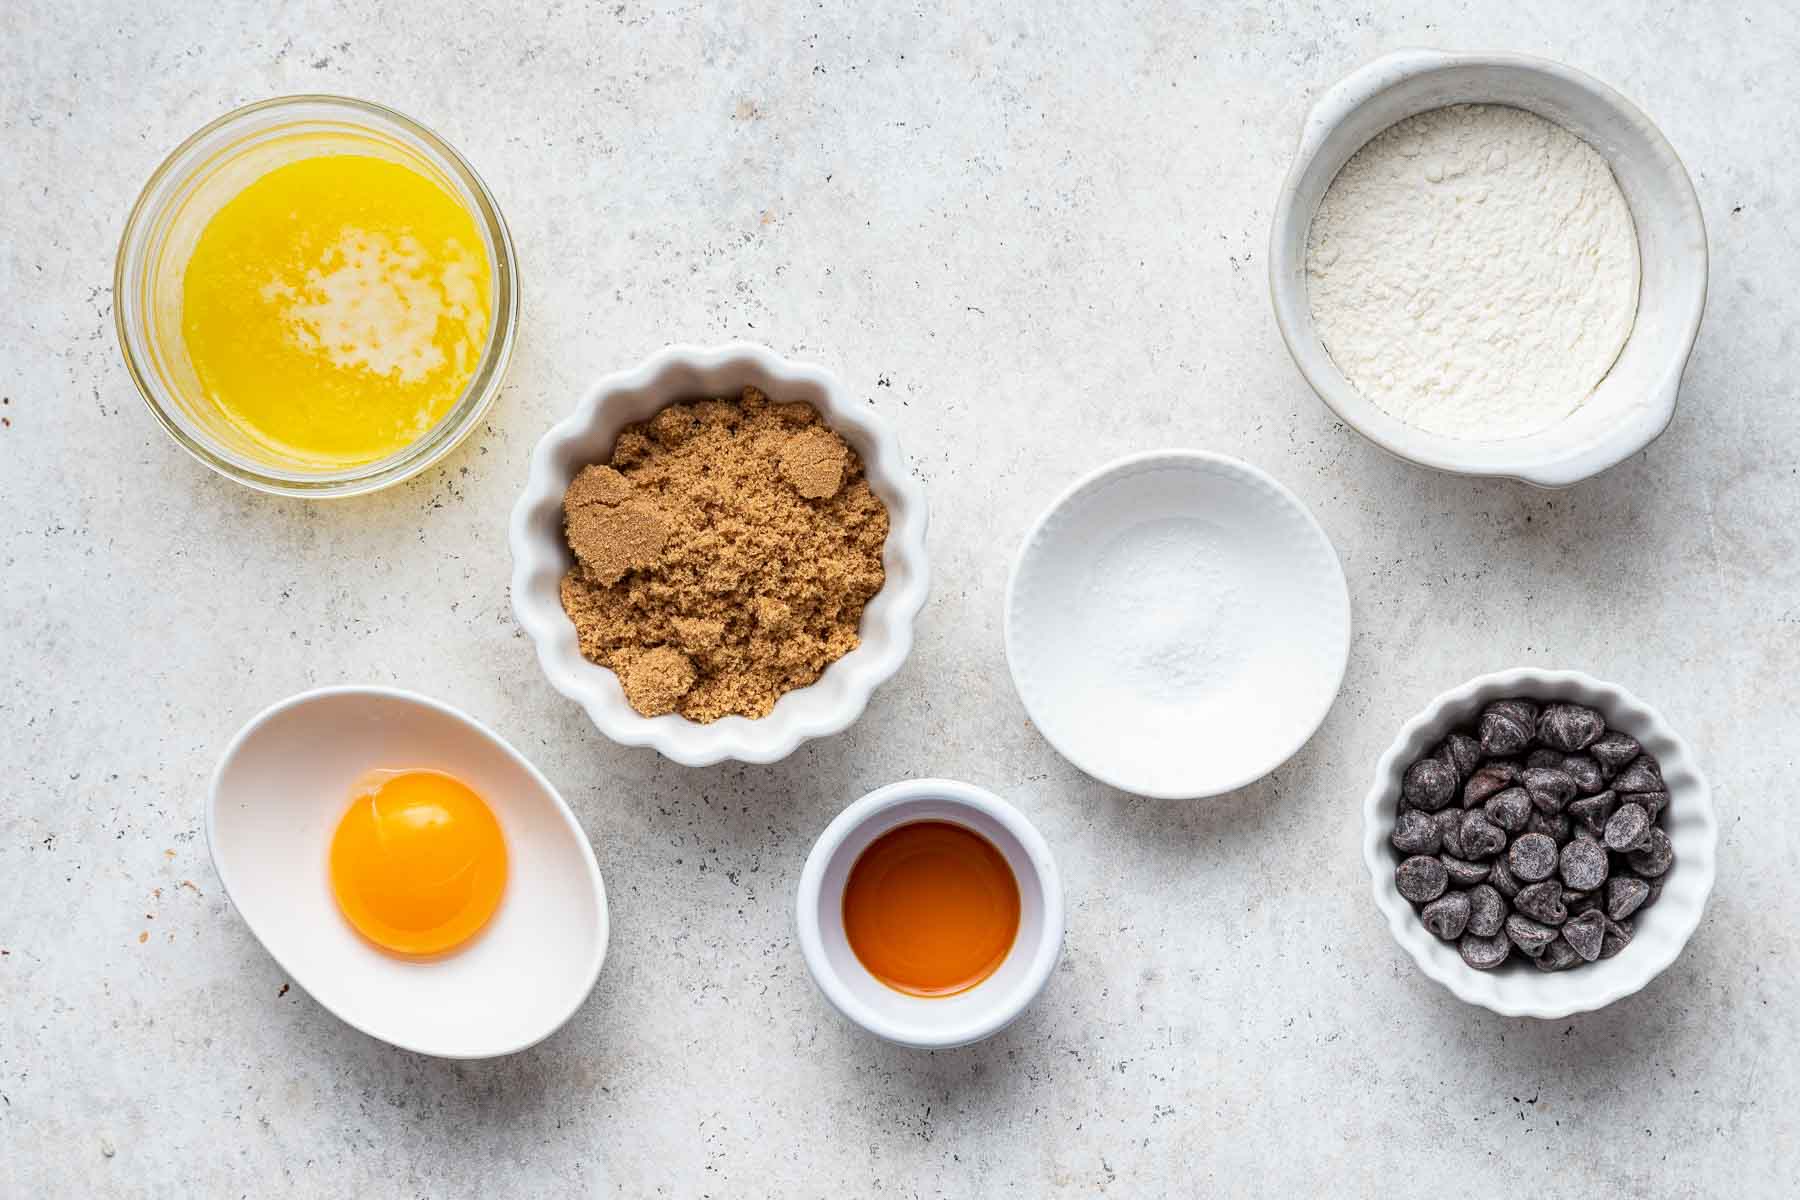 Small white bowls with melted butter, egg yolk, brown sugar, and chocolate chips on grey counter.